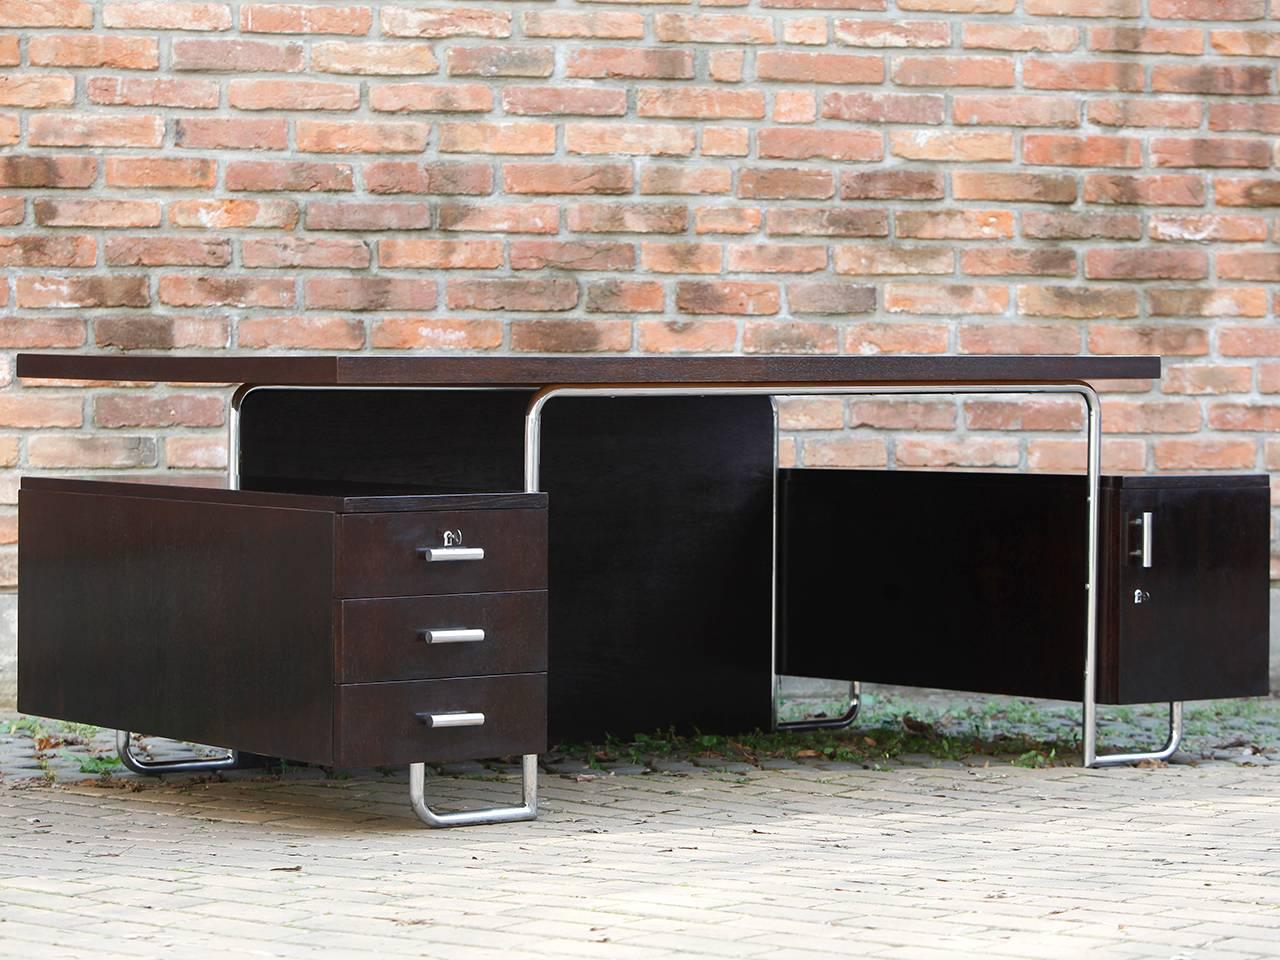 Unusually large desk made from chromium-plated steel tubing
Produced by Mücke Melder in the Czech Republic in the 1930s
These are tables were produced in relatively small number 
Completely restored, steel tube with original chrome plating.